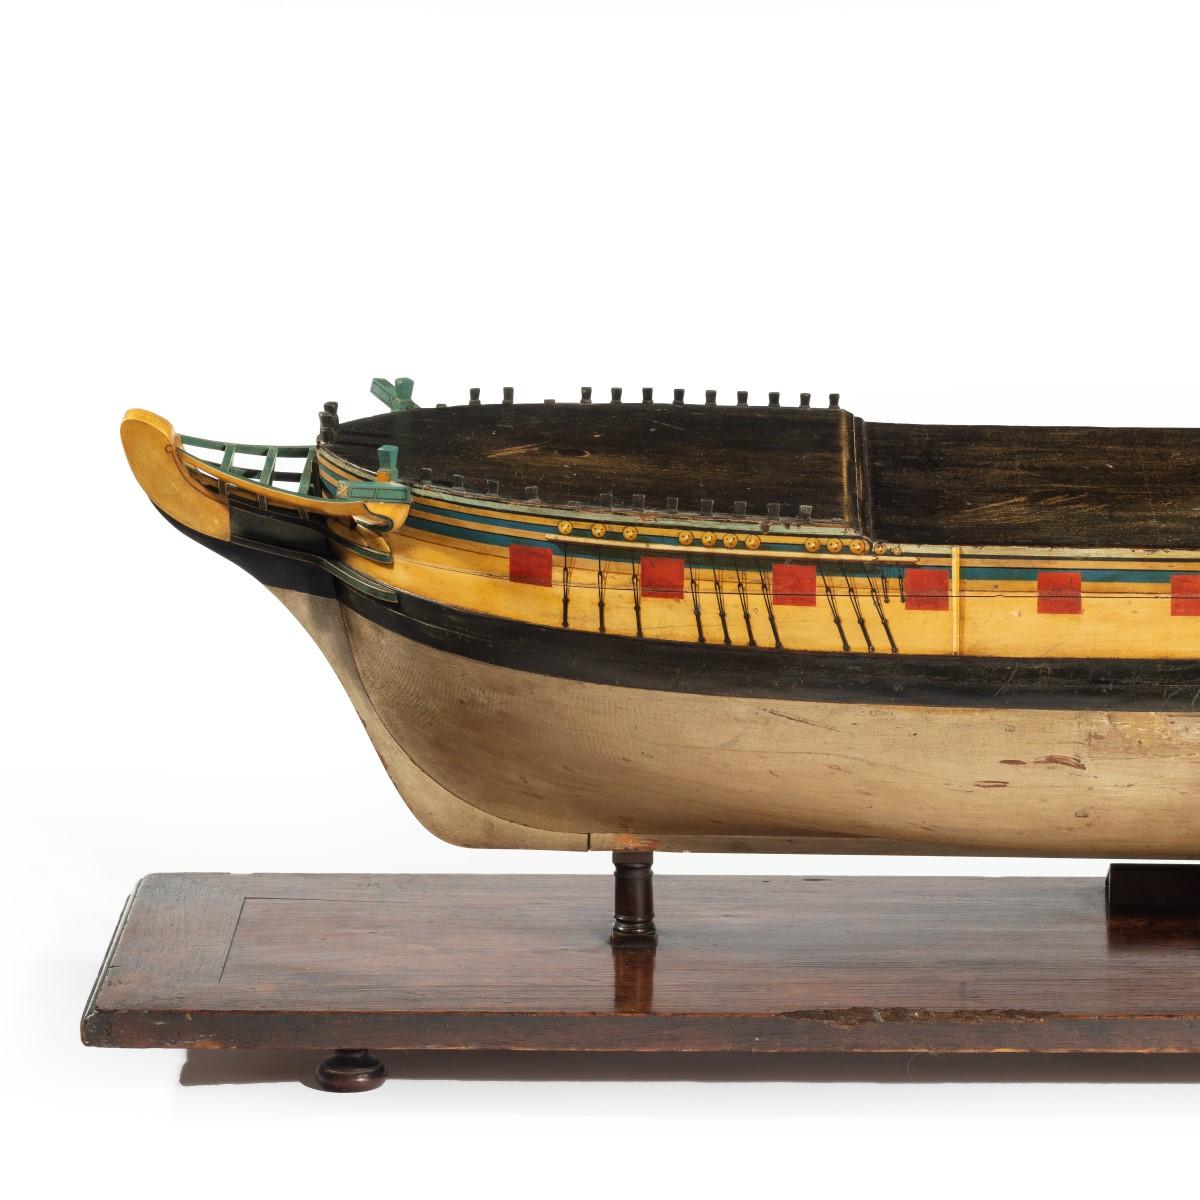 A carved and painted model of HMS Emerald, 1811 and ‘HMS Emerald and HMS Amethyst’ by Pocock